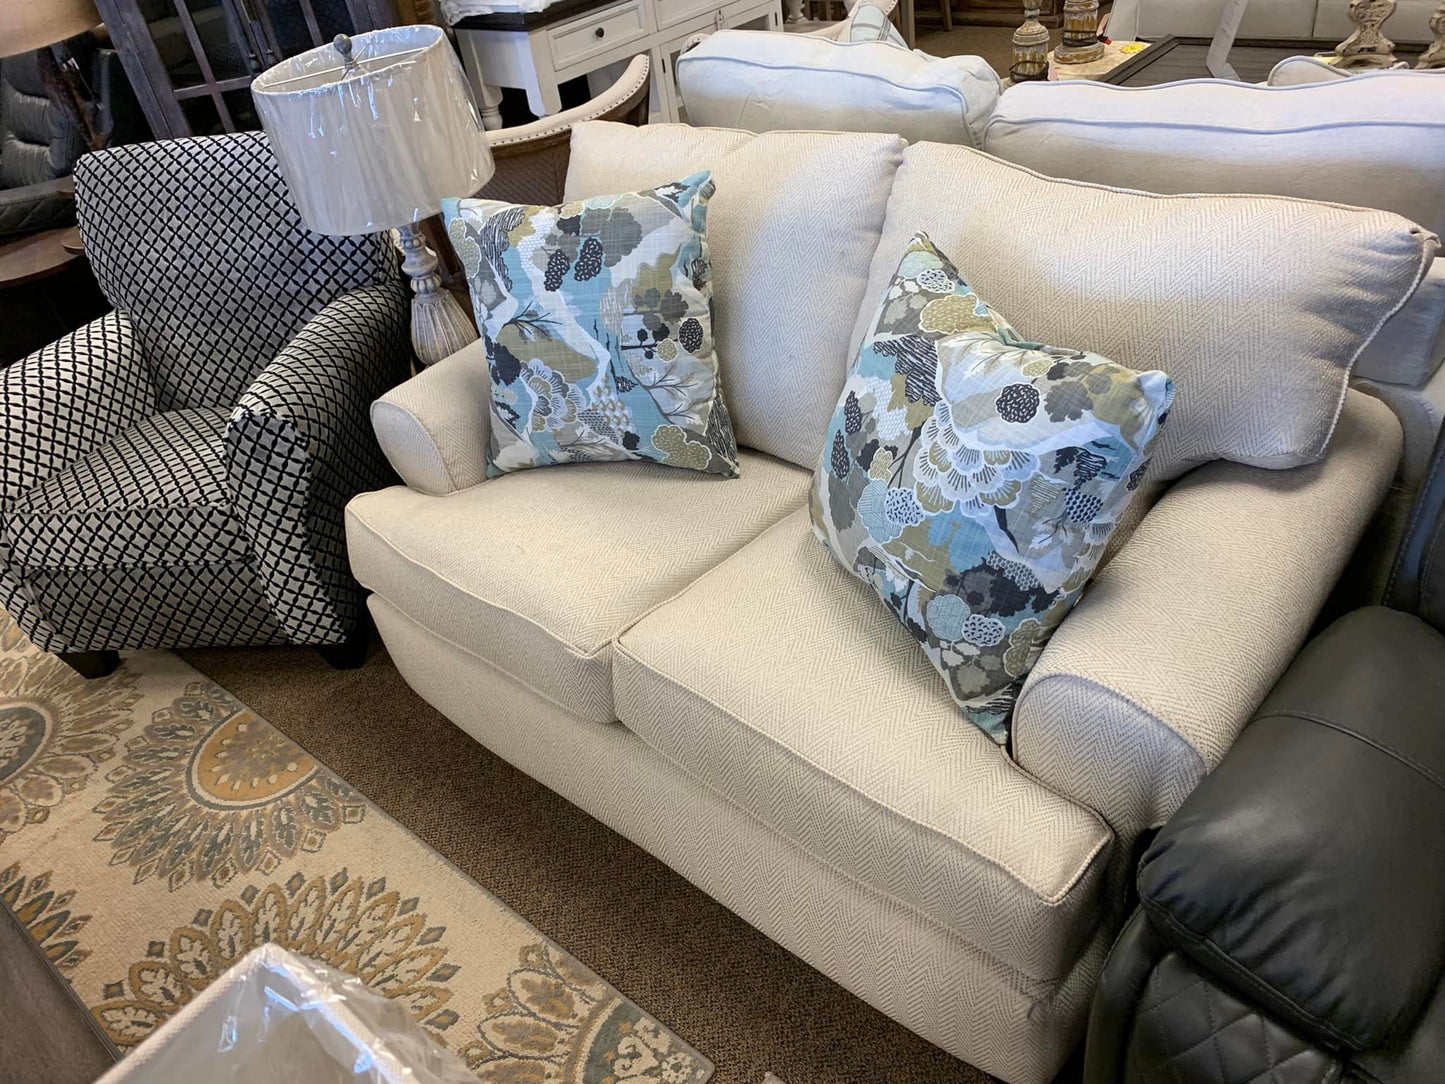 WEEKLY or MONTHLY. Madonna Ocean Teal Feel Couch & Loveseat